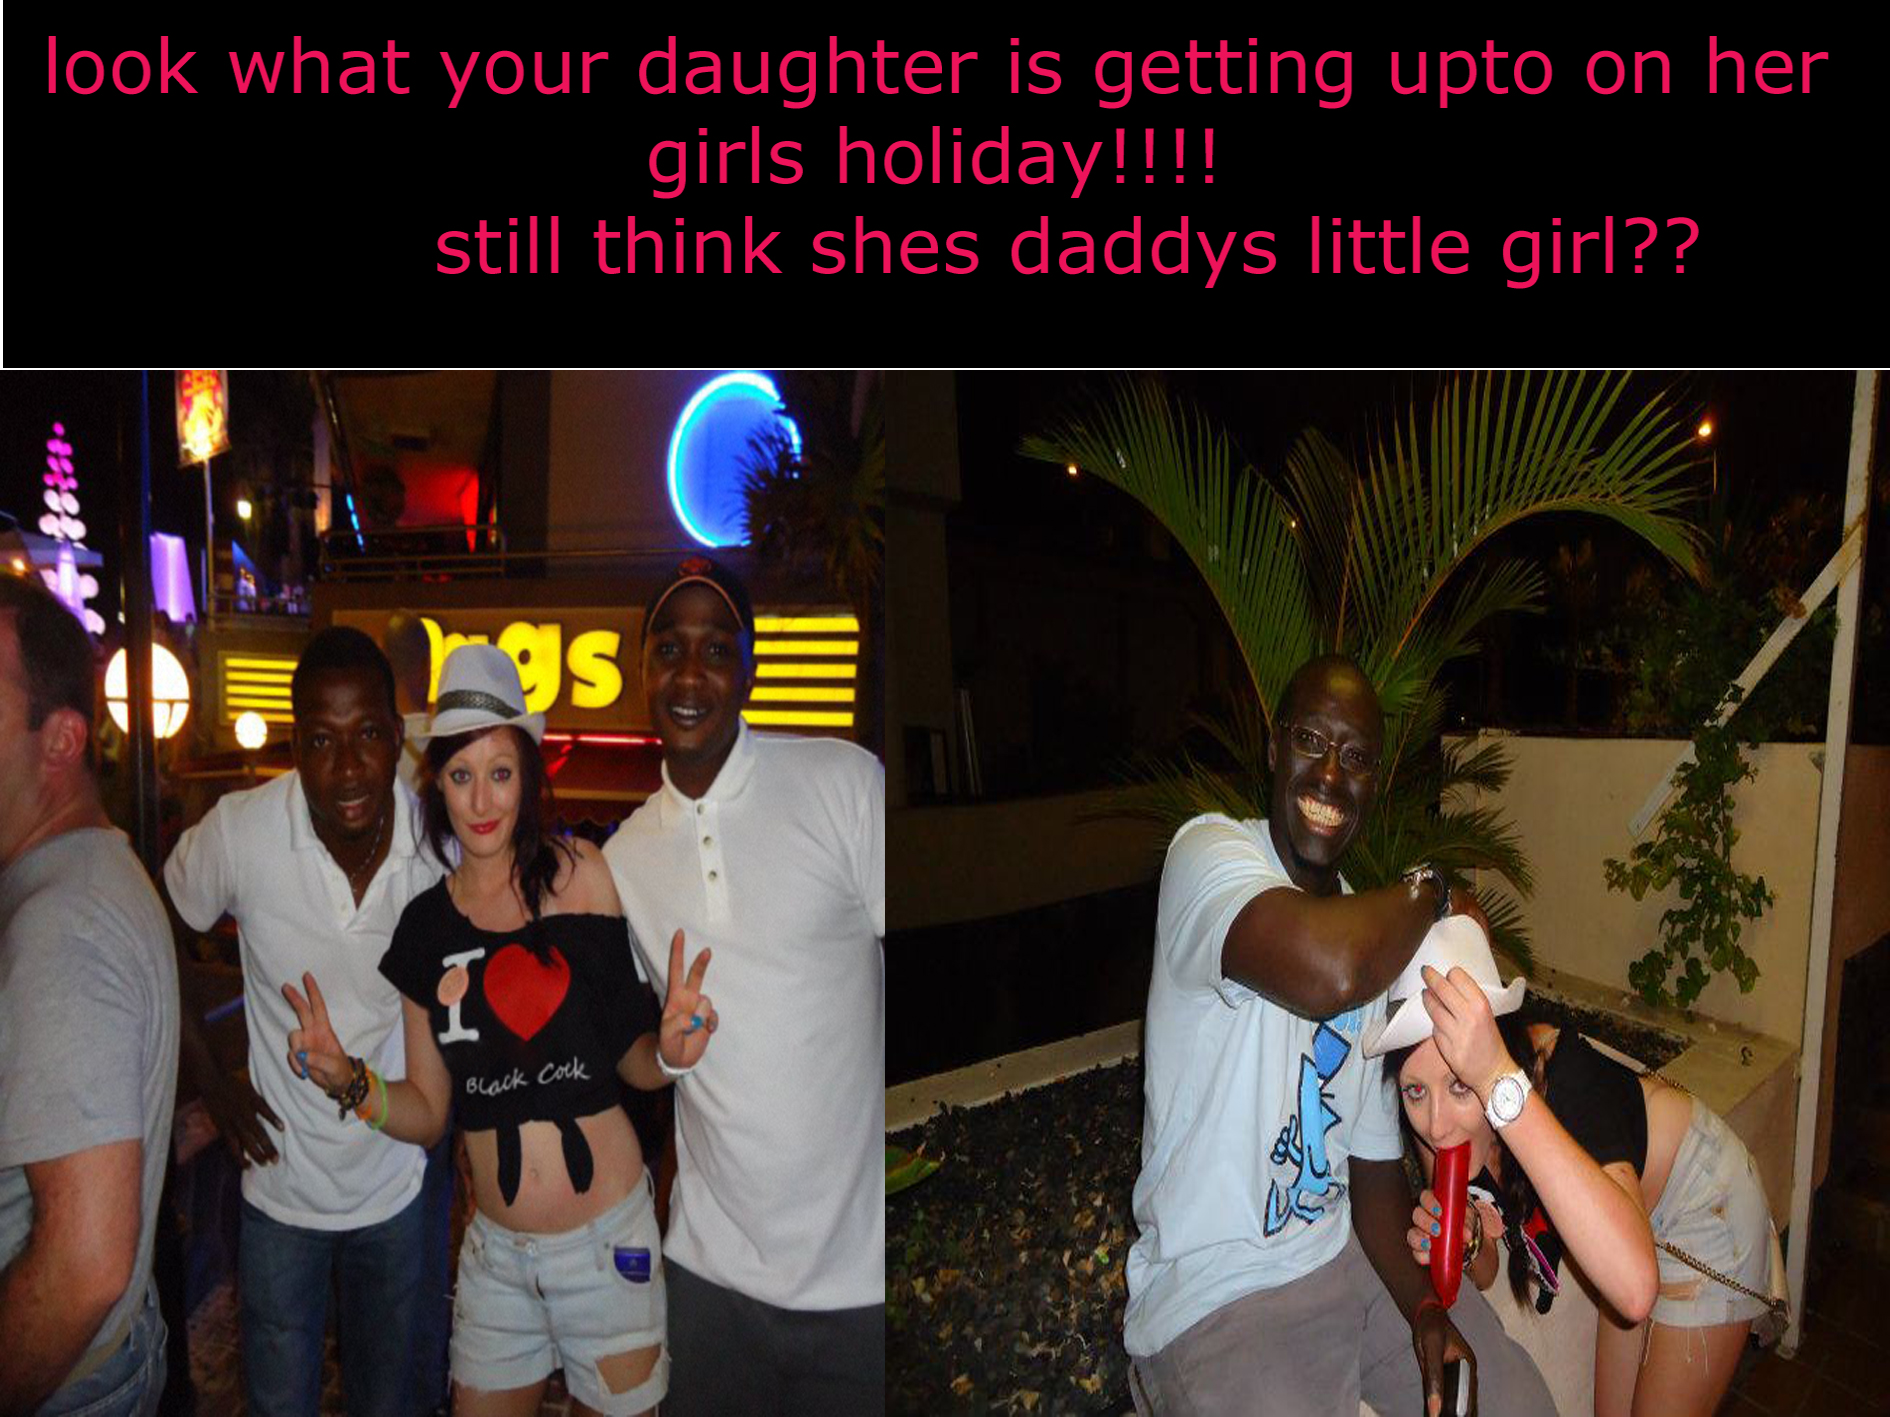 daughters on holiday.... not your lil girl any more